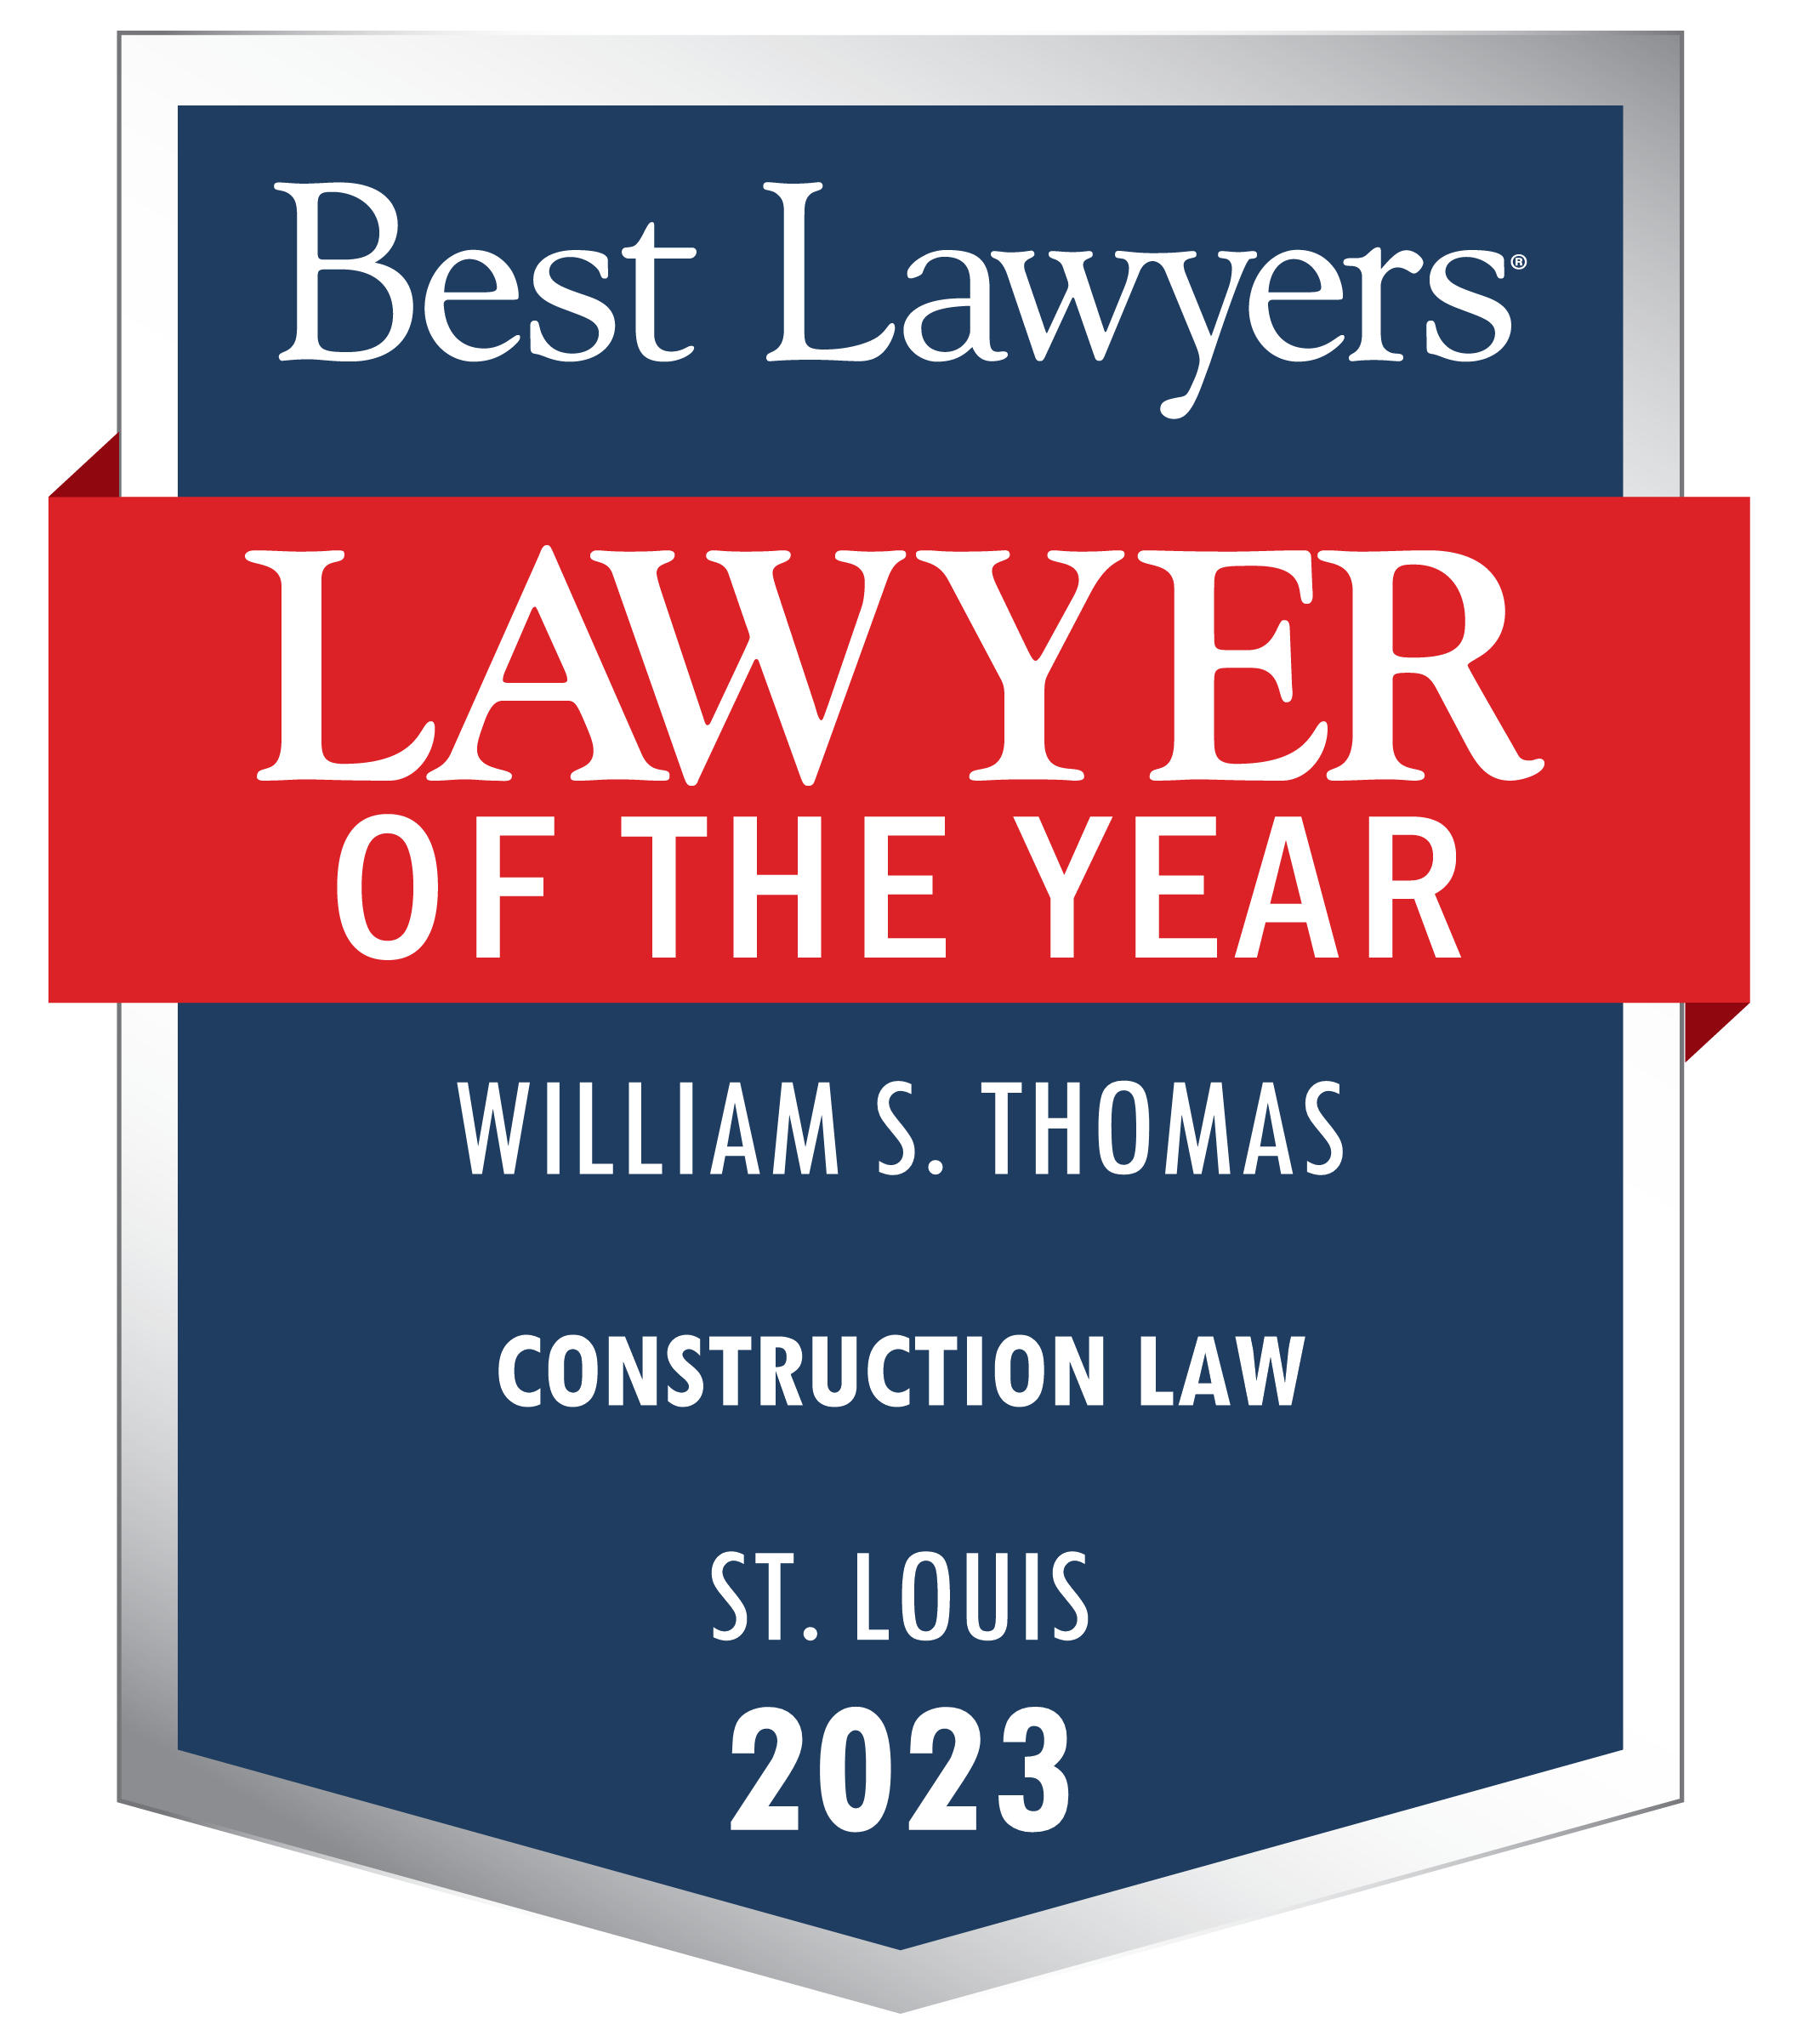 2023 Bill Thomas Best Lawyers Lawyer of the Year Contemporary Logo